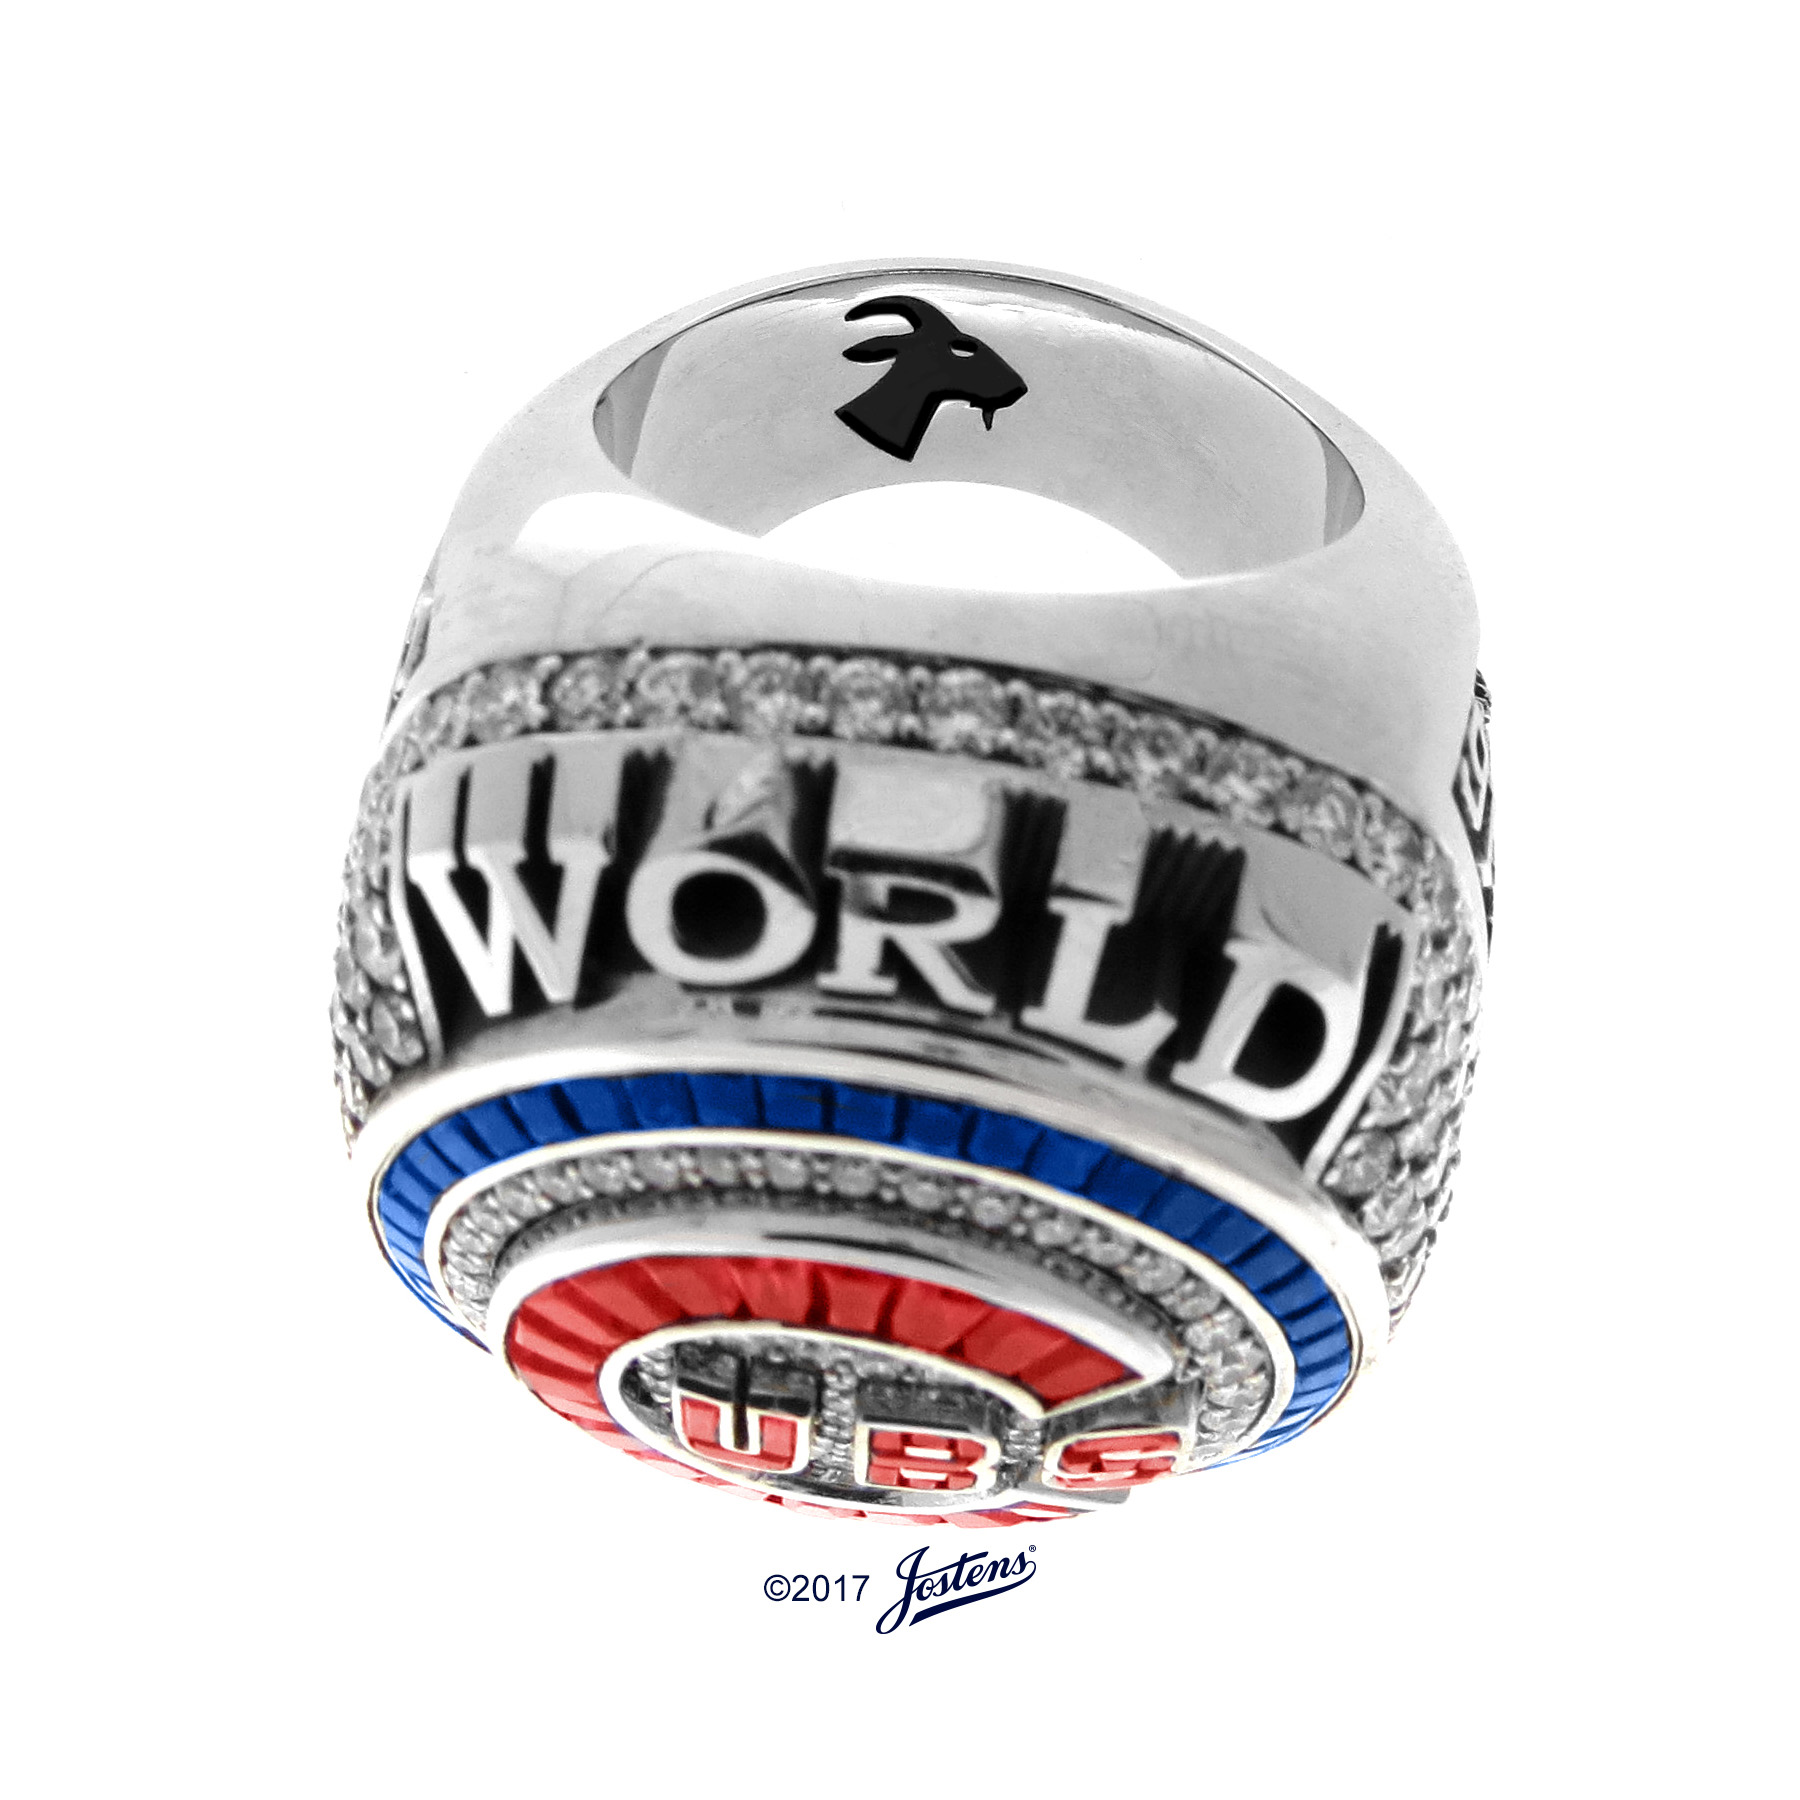 Rally Squirrel on World Series ring!